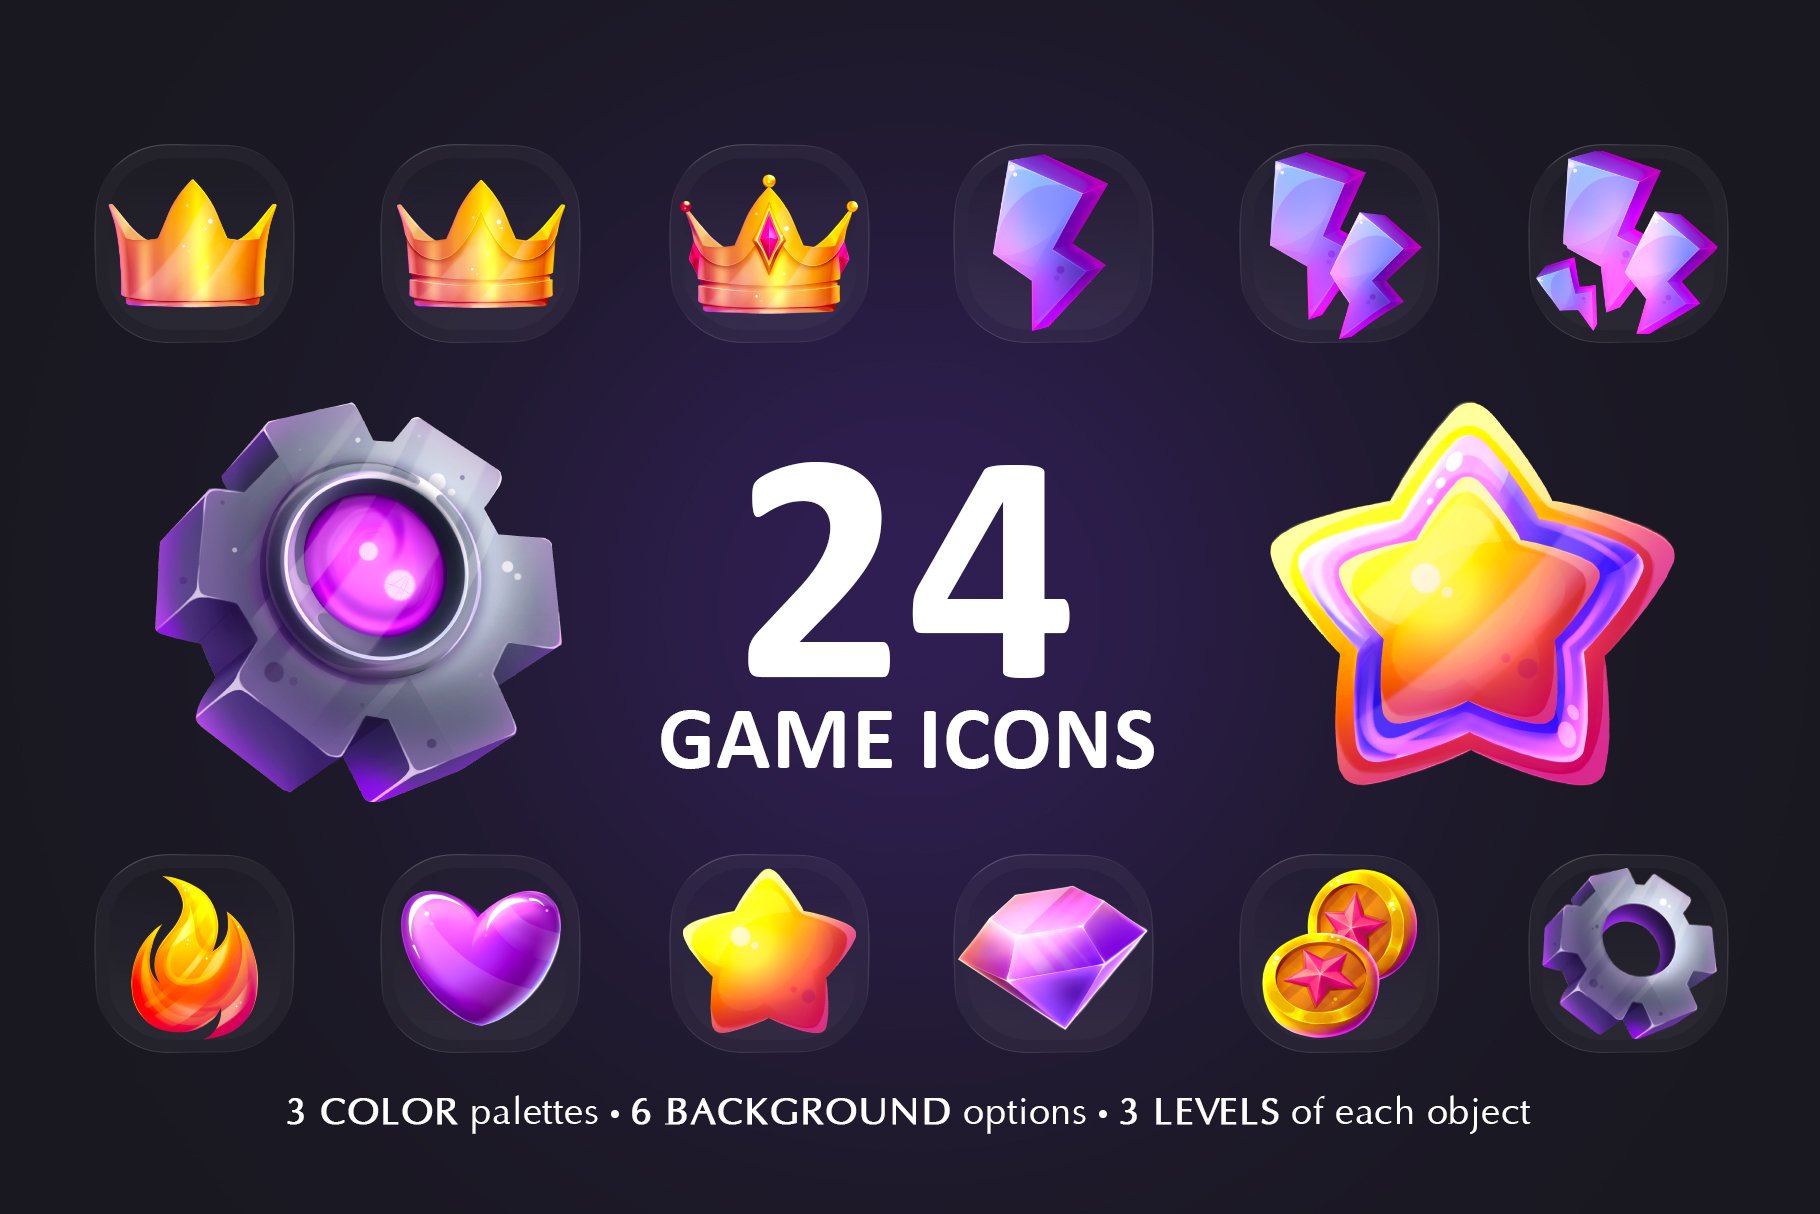 Game Items, Set of 24 Game Icons cover image.